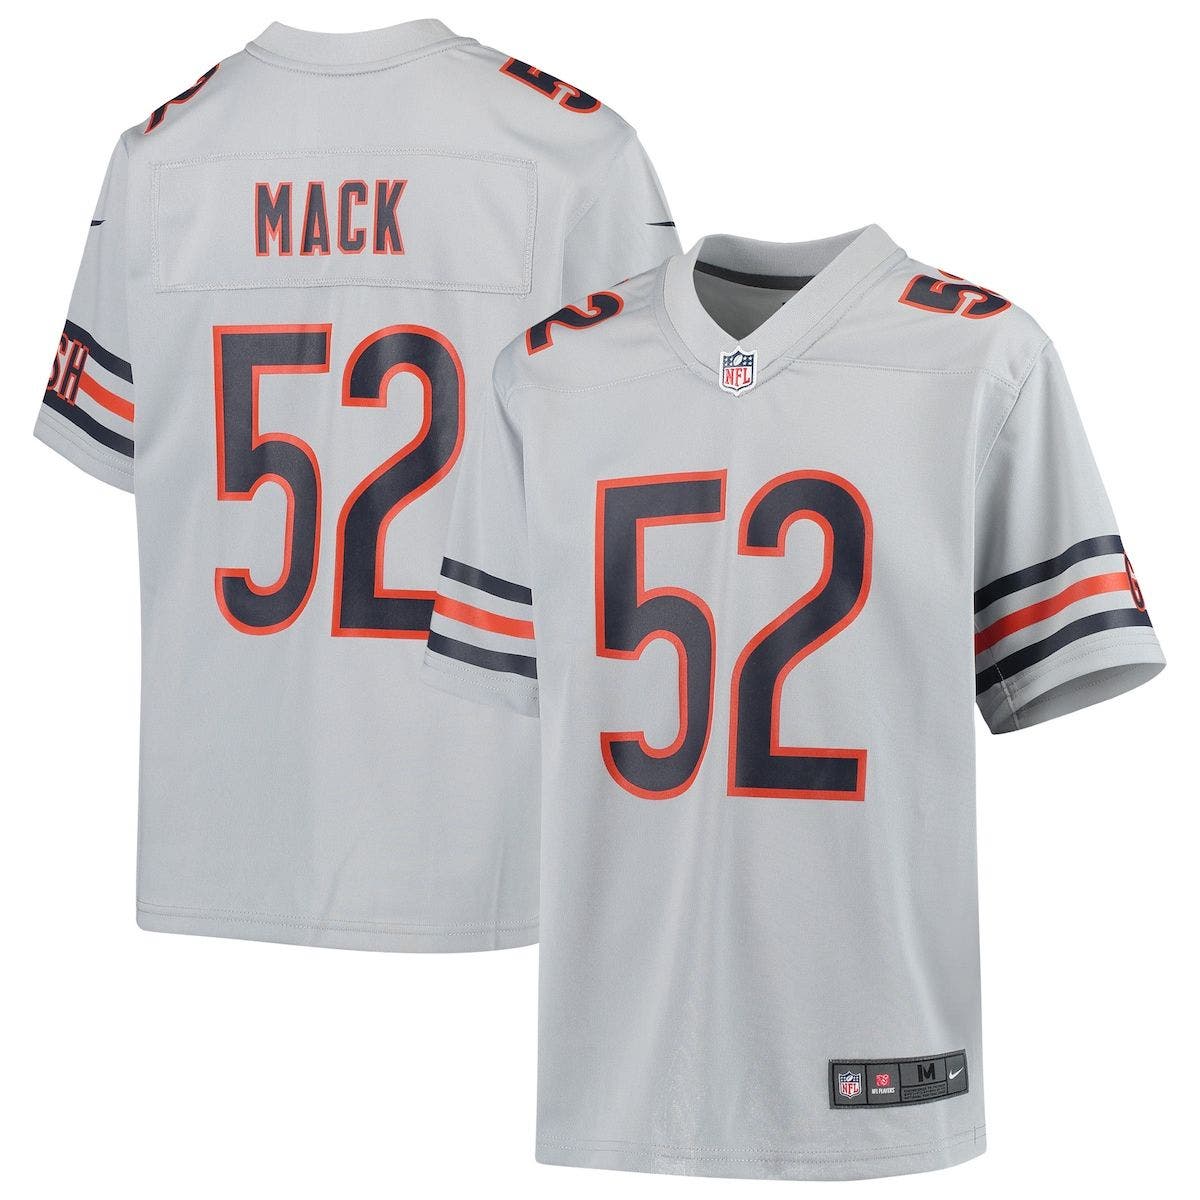 UPC 193774538869 product image for Youth Nike Khalil Mack Silver Chicago Bears Inverted Game Jersey at Nordstrom | upcitemdb.com